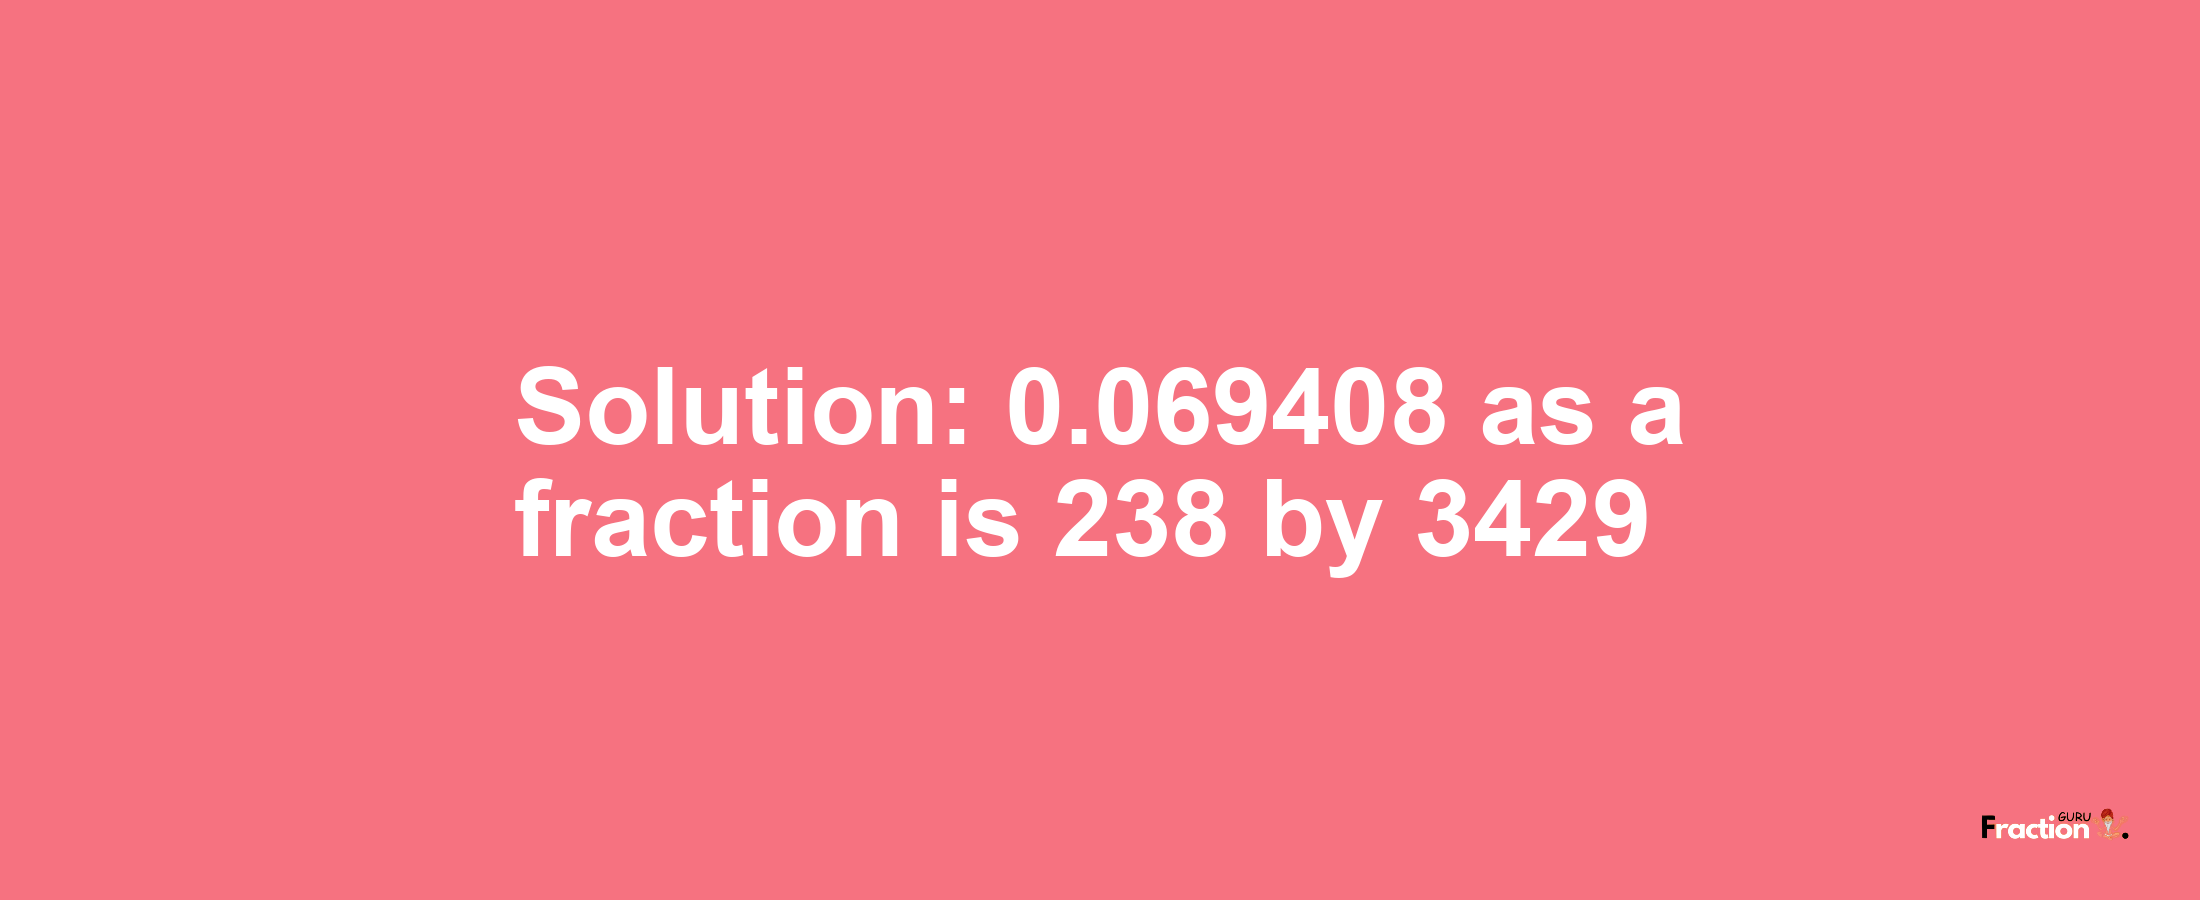 Solution:0.069408 as a fraction is 238/3429